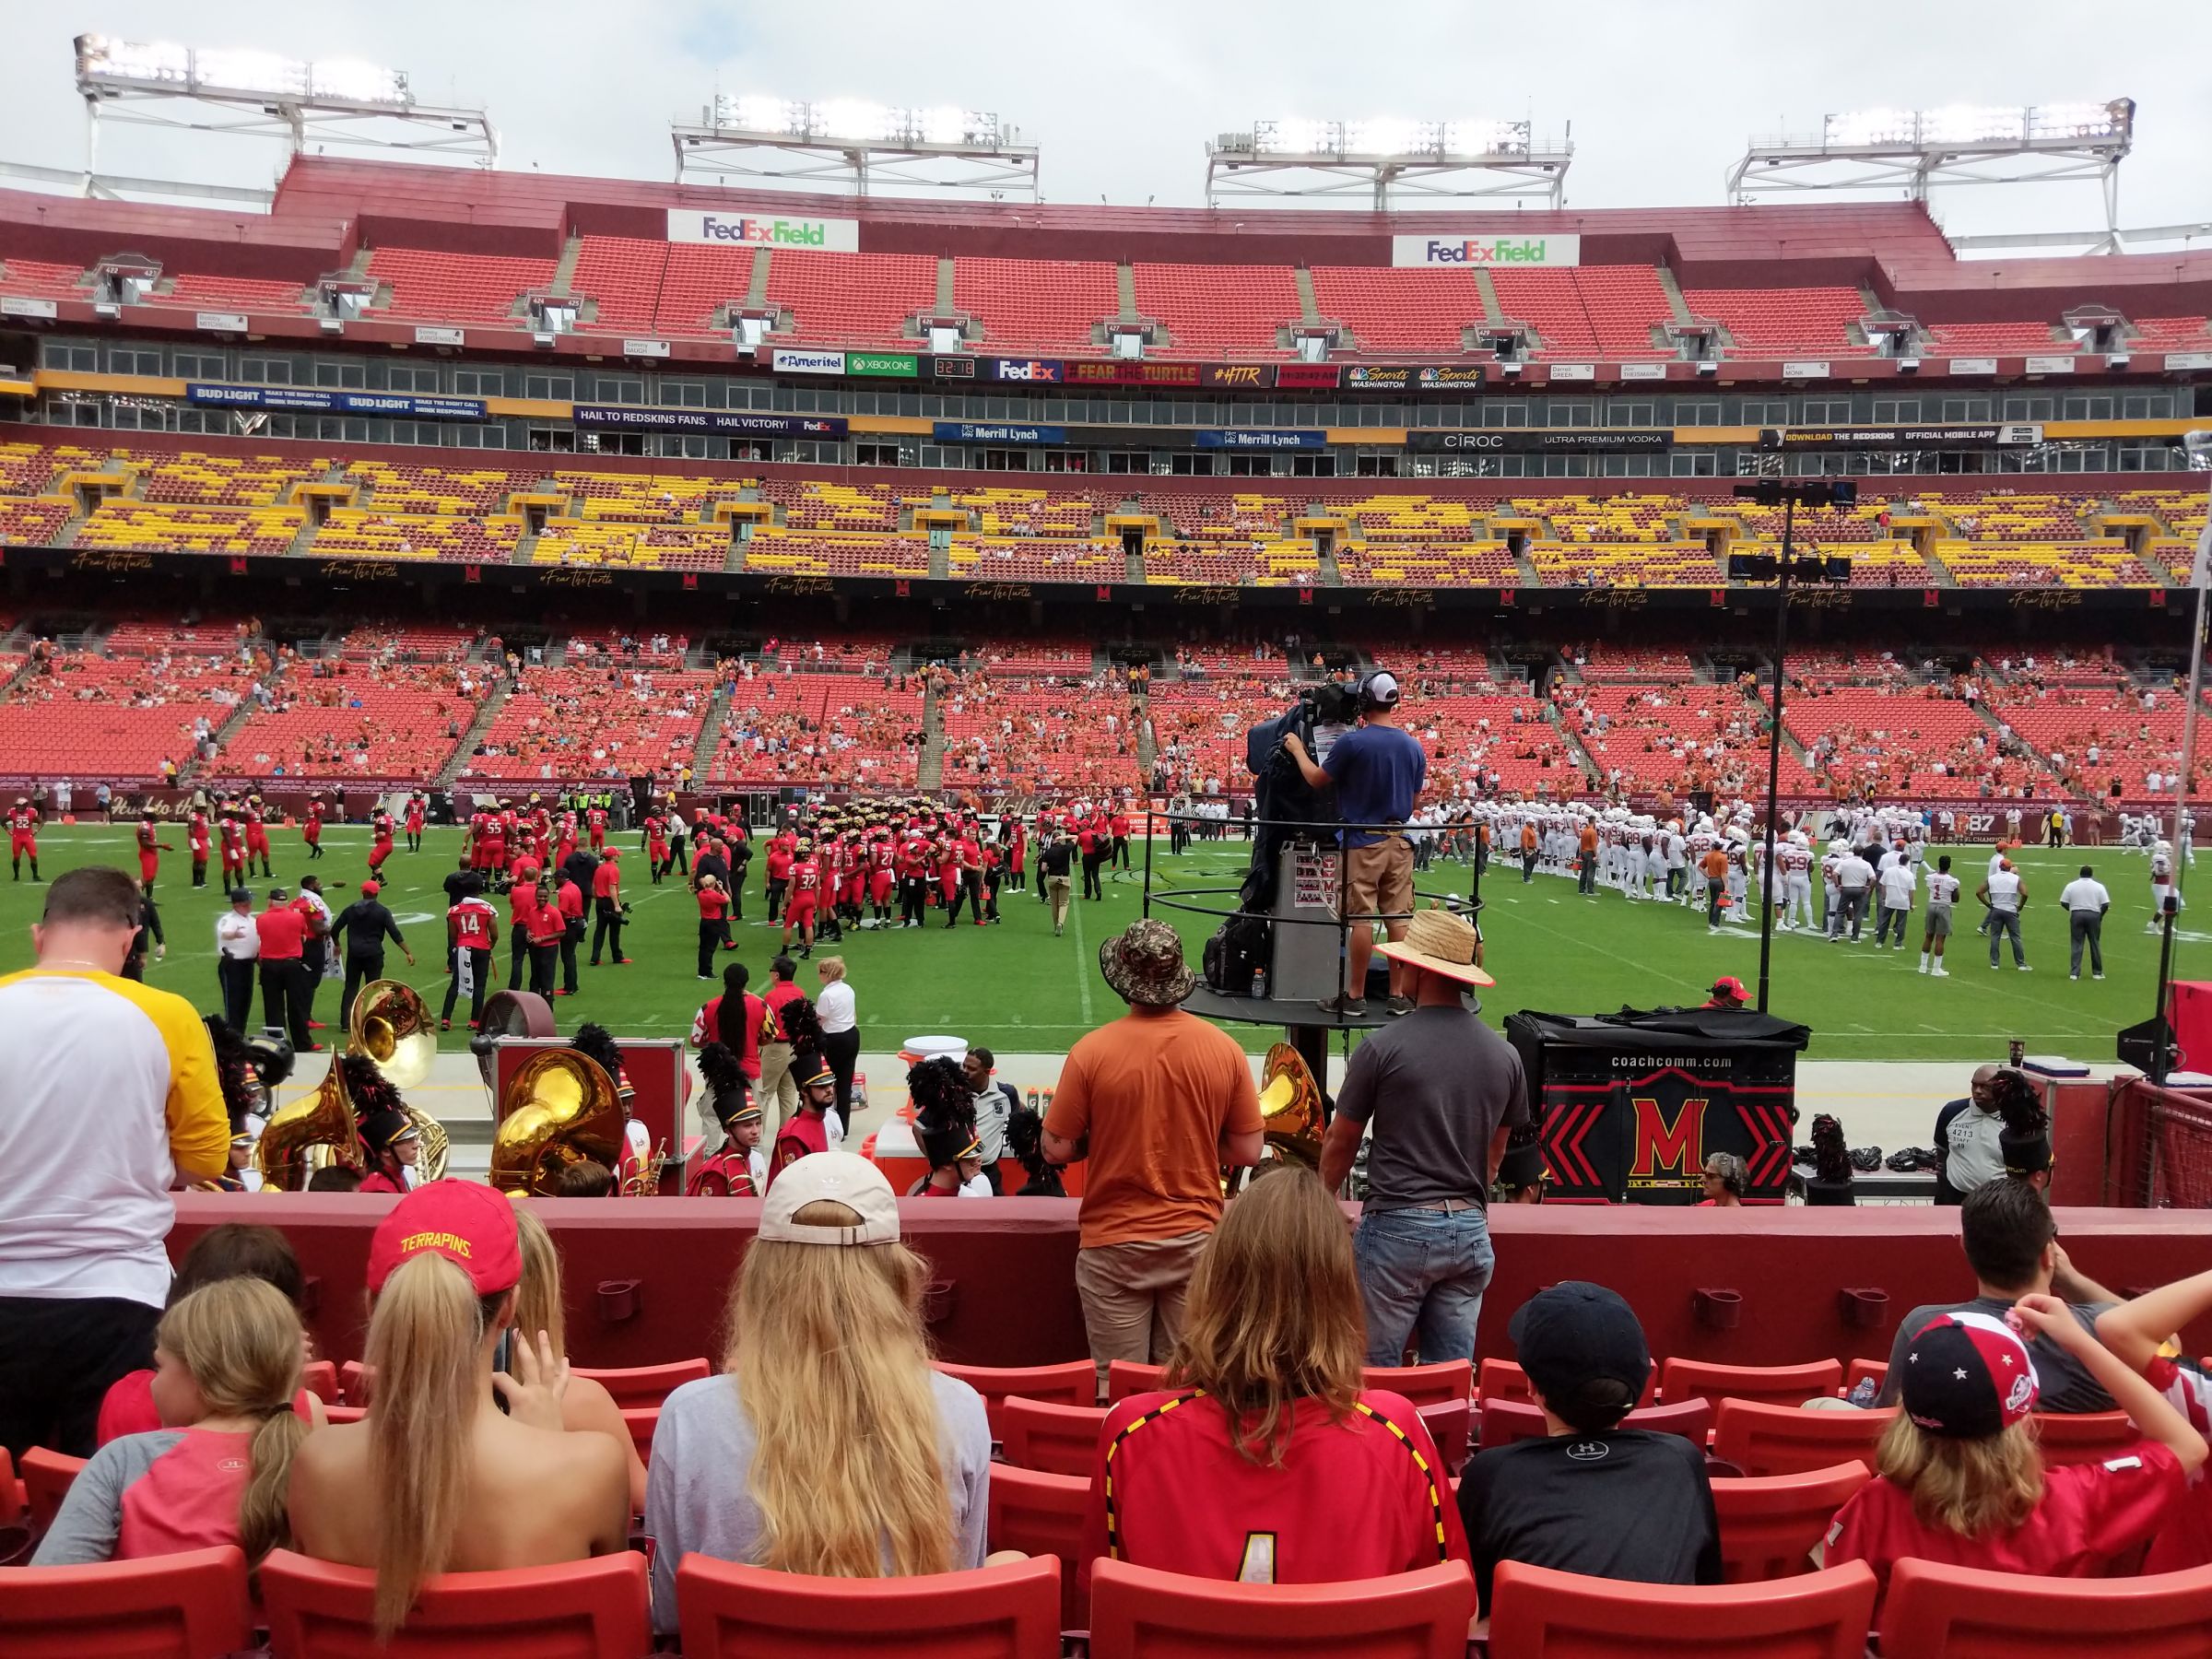 section 101, row 7 seat view  - fedexfield